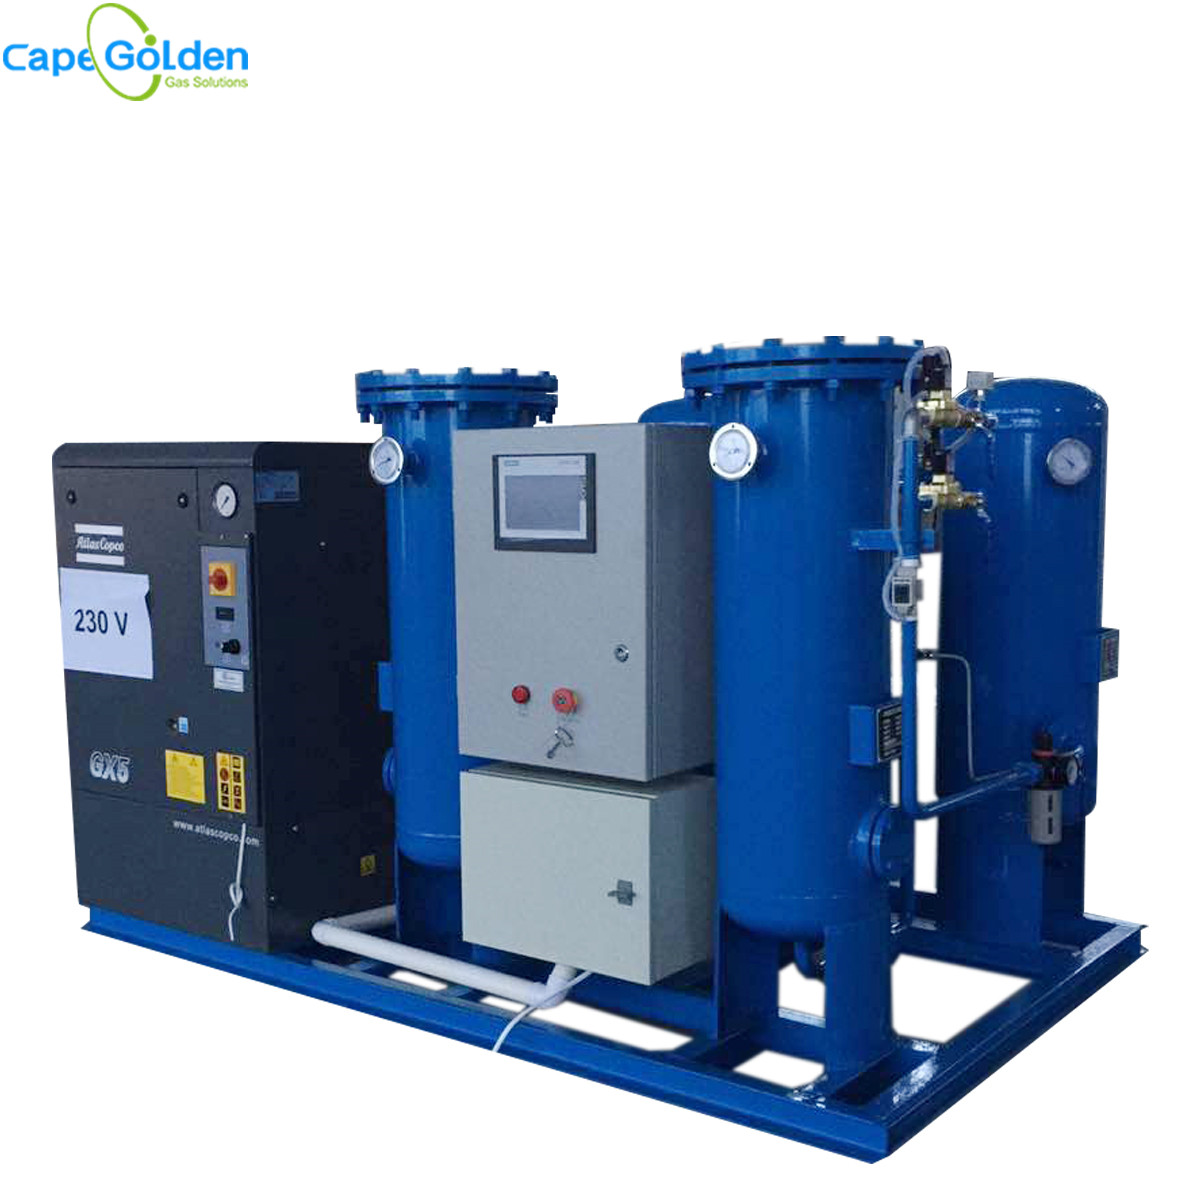 Wholesale Dealers of Self Contained Oxygen Generator -
 Integrated oxygen generator for filling cylinders – Cape Golden